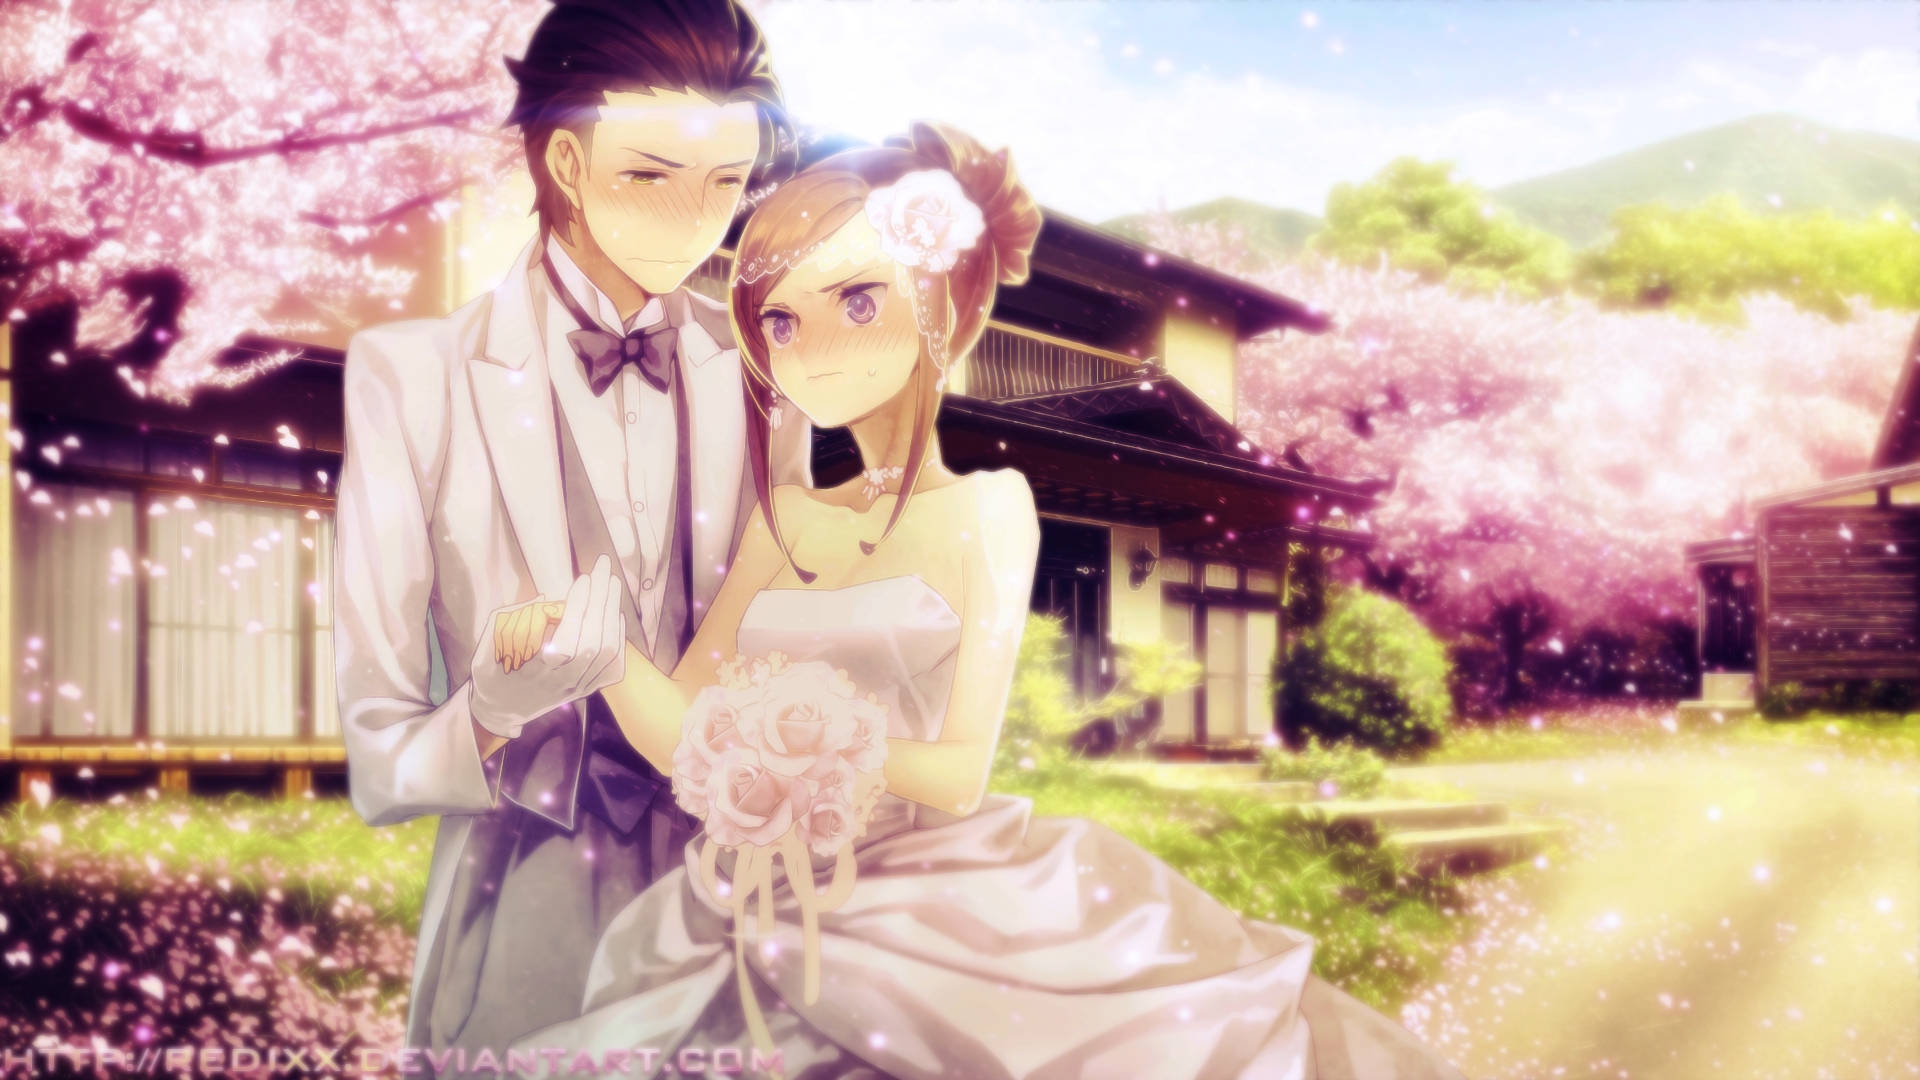 1920X1080 Wedding Aesthetic Wallpaper and Background